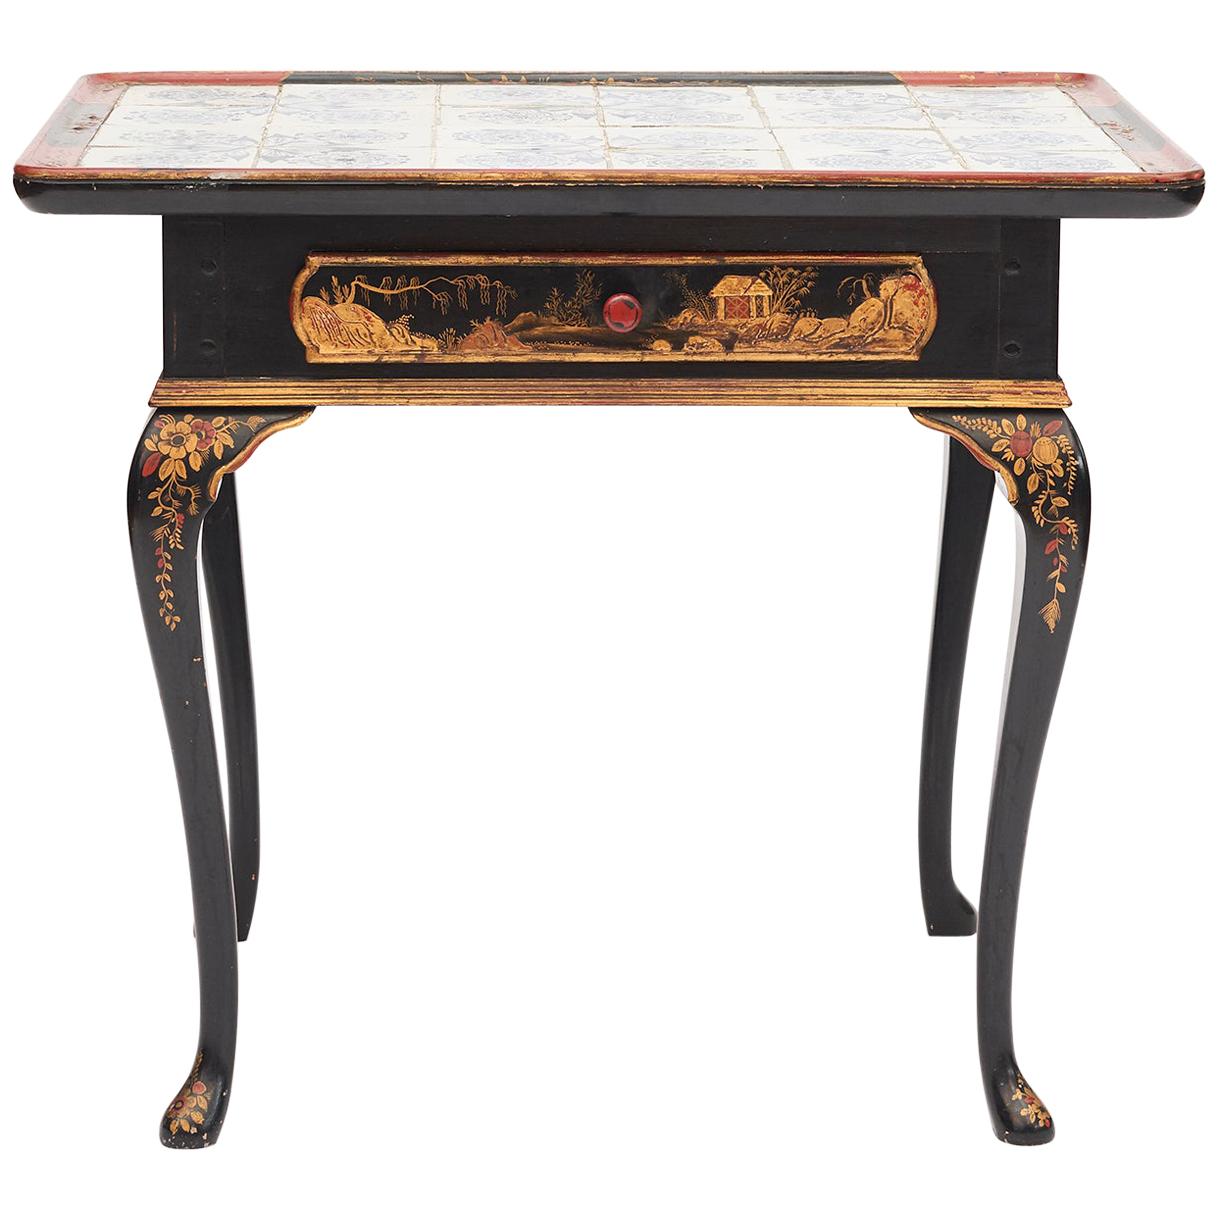 Danish Rococo Tile-Top Table with Chinese Motifs